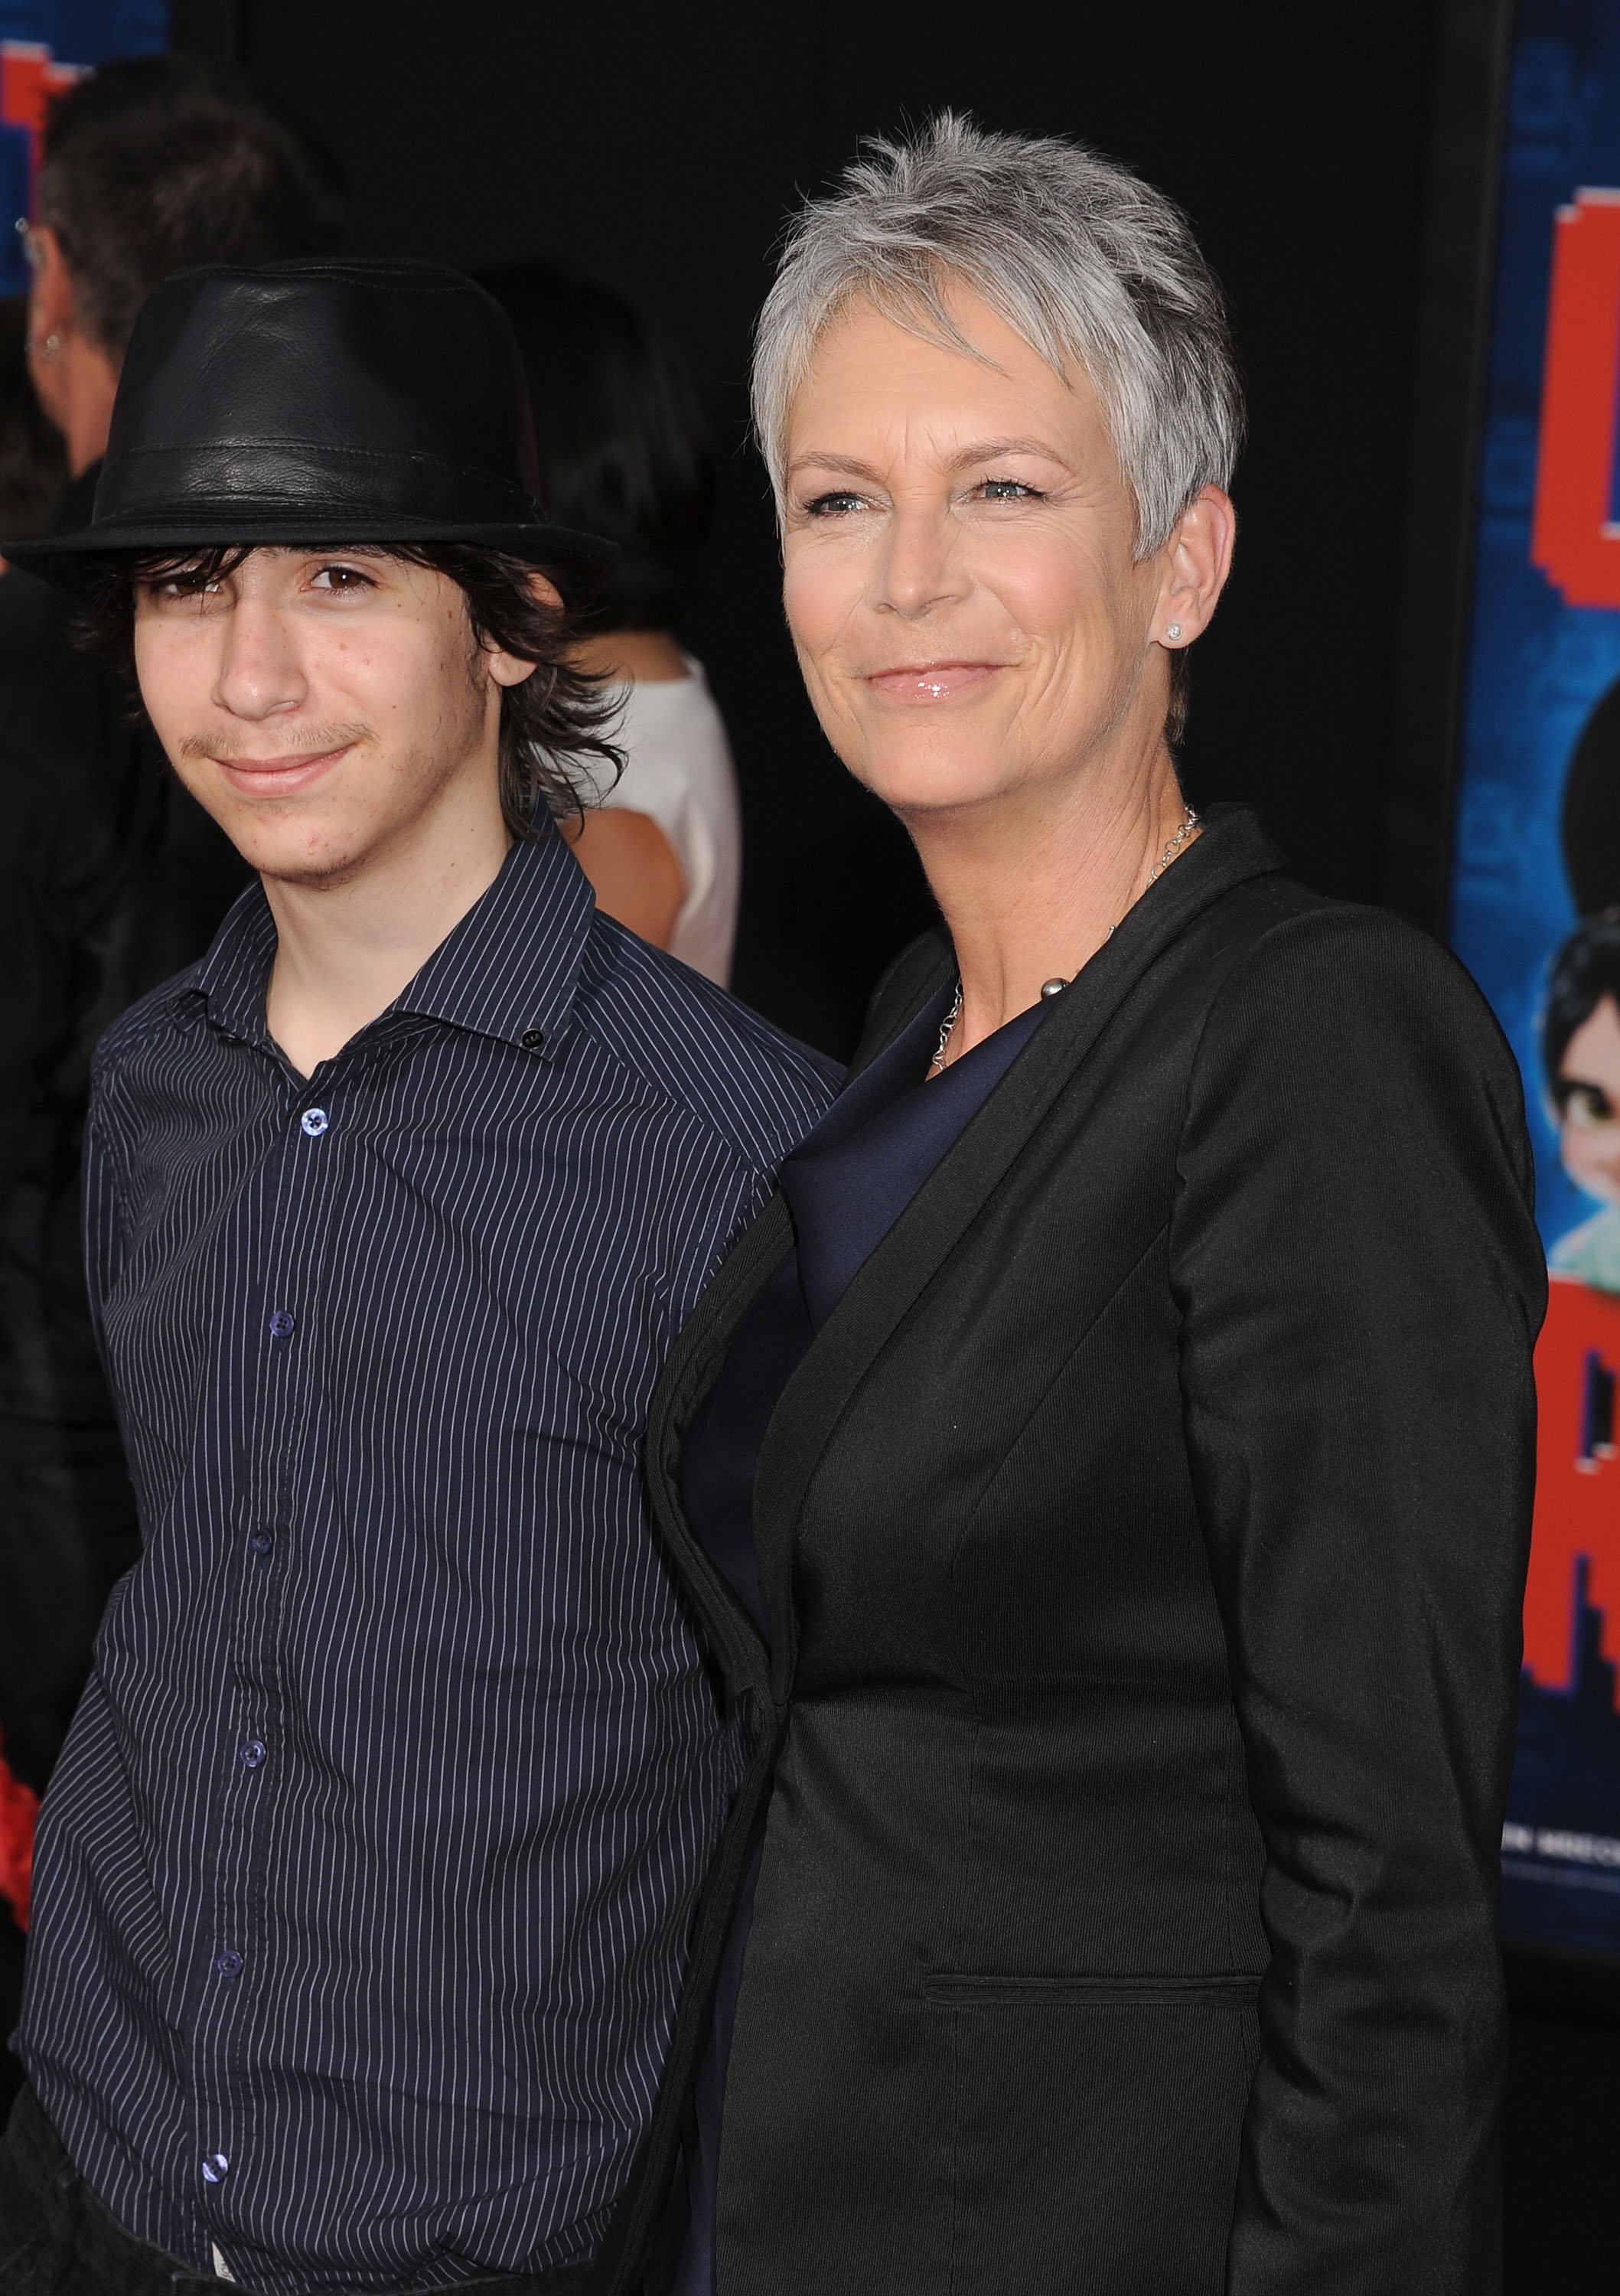 Thomas Guest and Jamie Lee Curtis at the Los Angeles premiere of "Wreck-It Ralph" on October 29, 2012, in Hollywood, California | Source: Getty Images